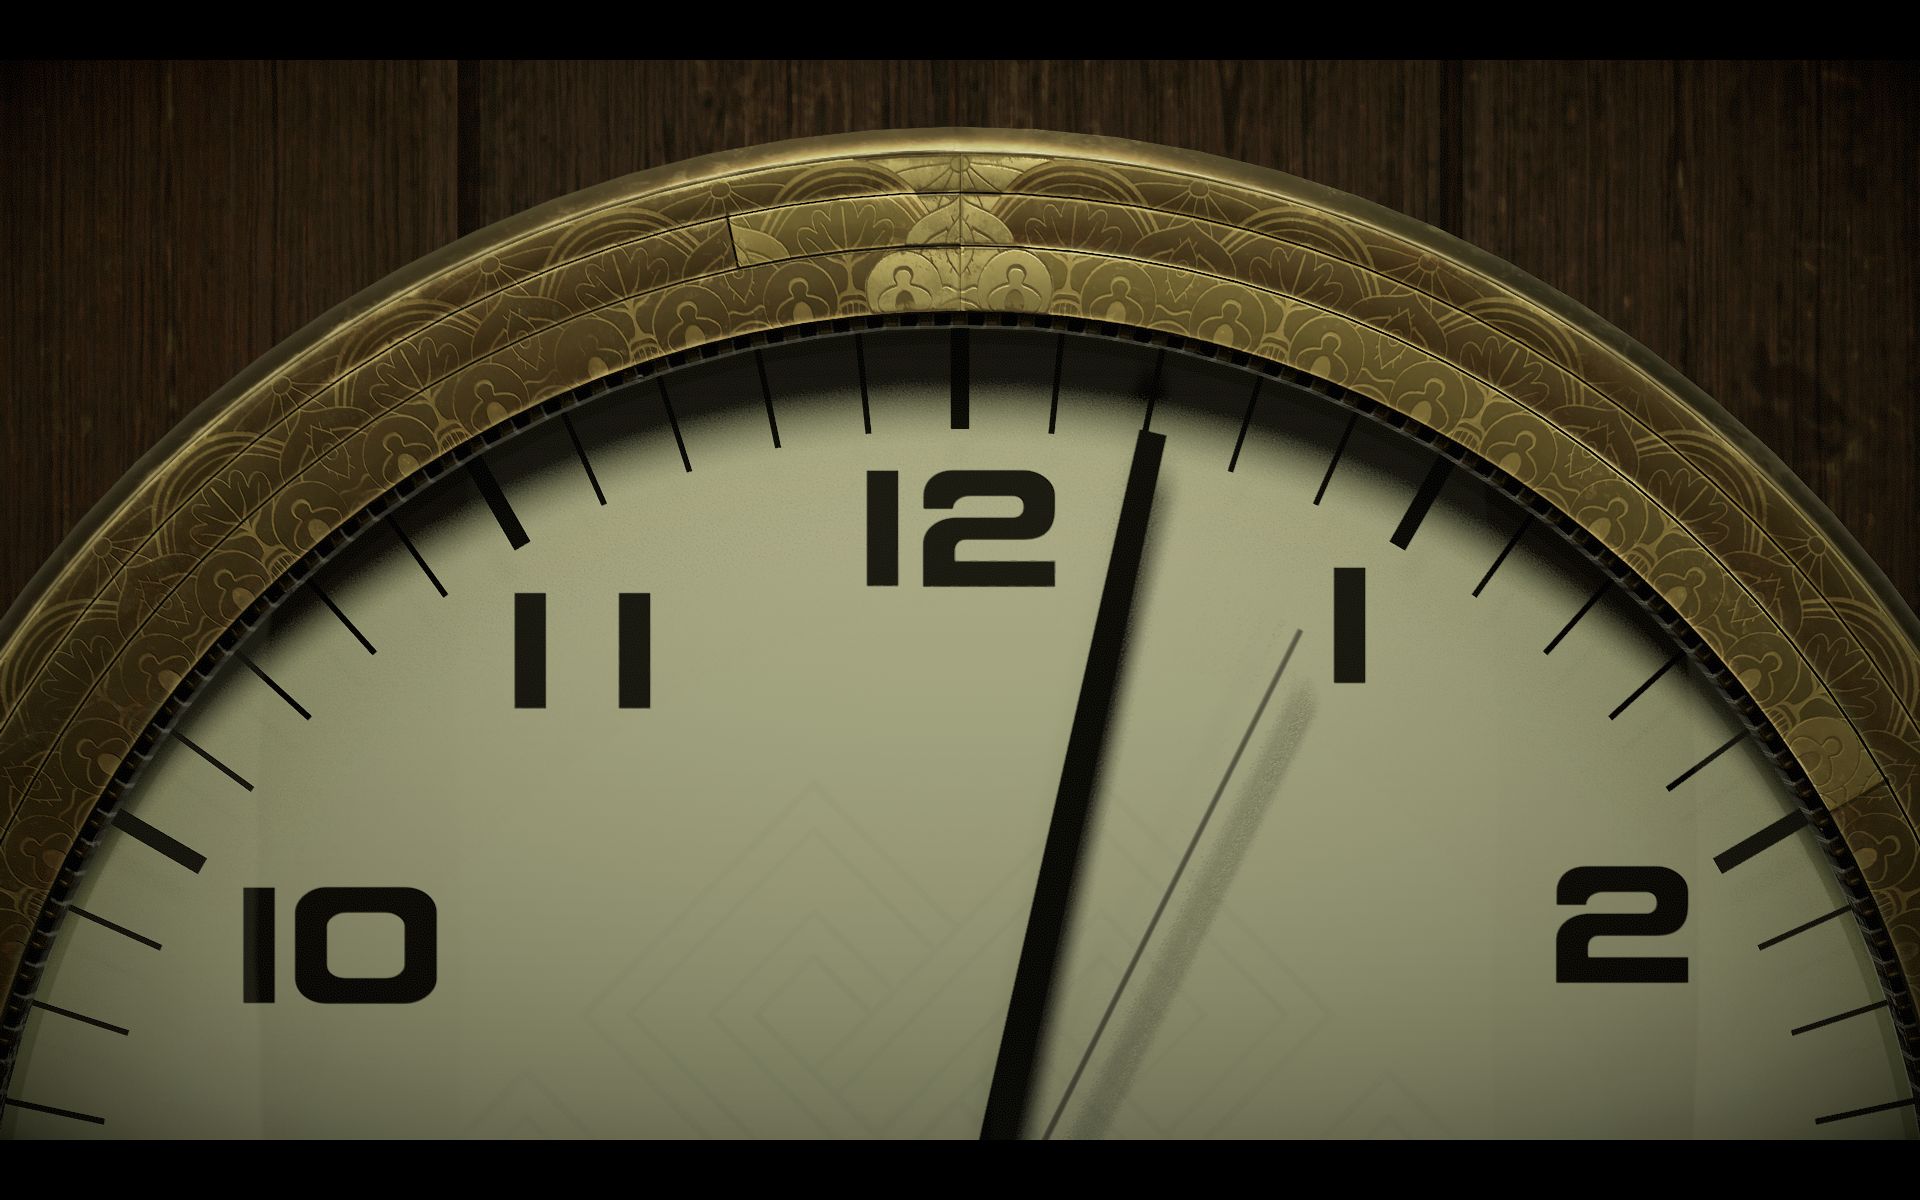 a close-up of an analog clock showing the minute hand at two minutes past the hour and the second hand between the four- and five-minute marks in Twelve Minutes